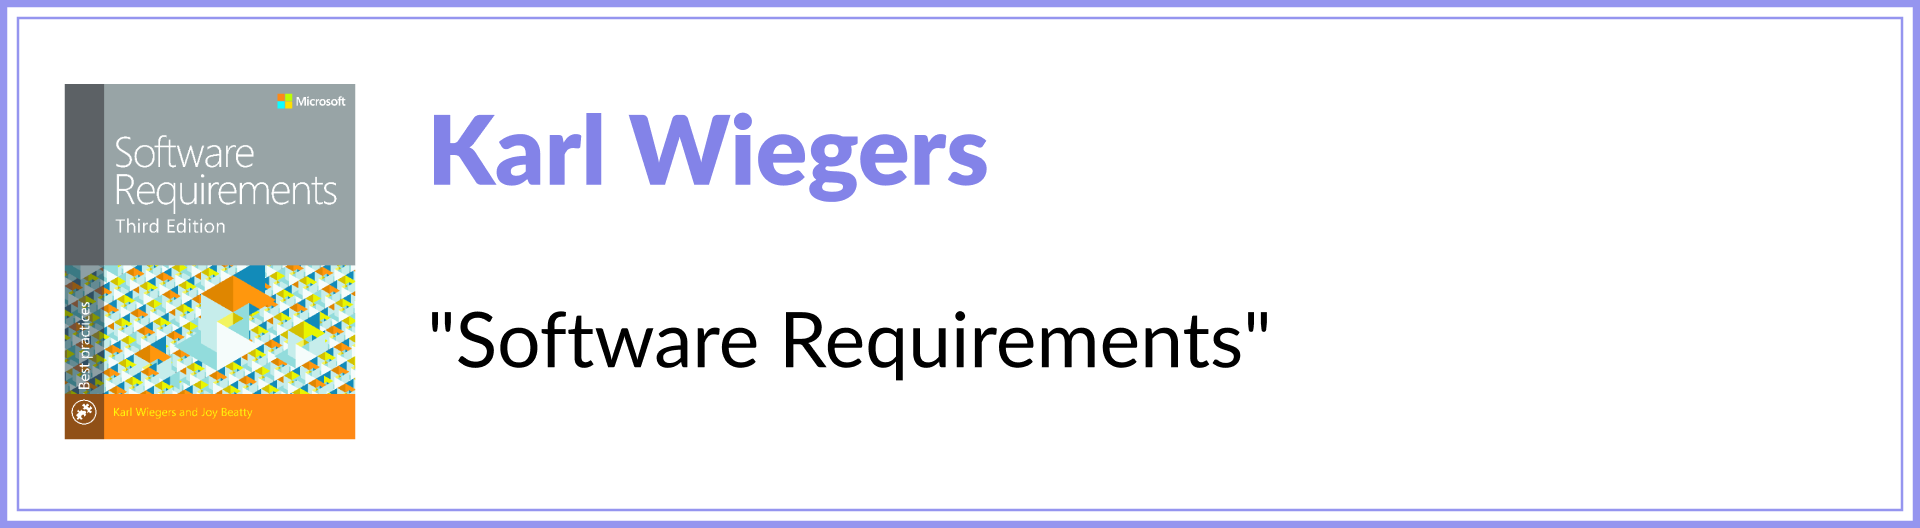 Karl Wiegers “Software Requirements”